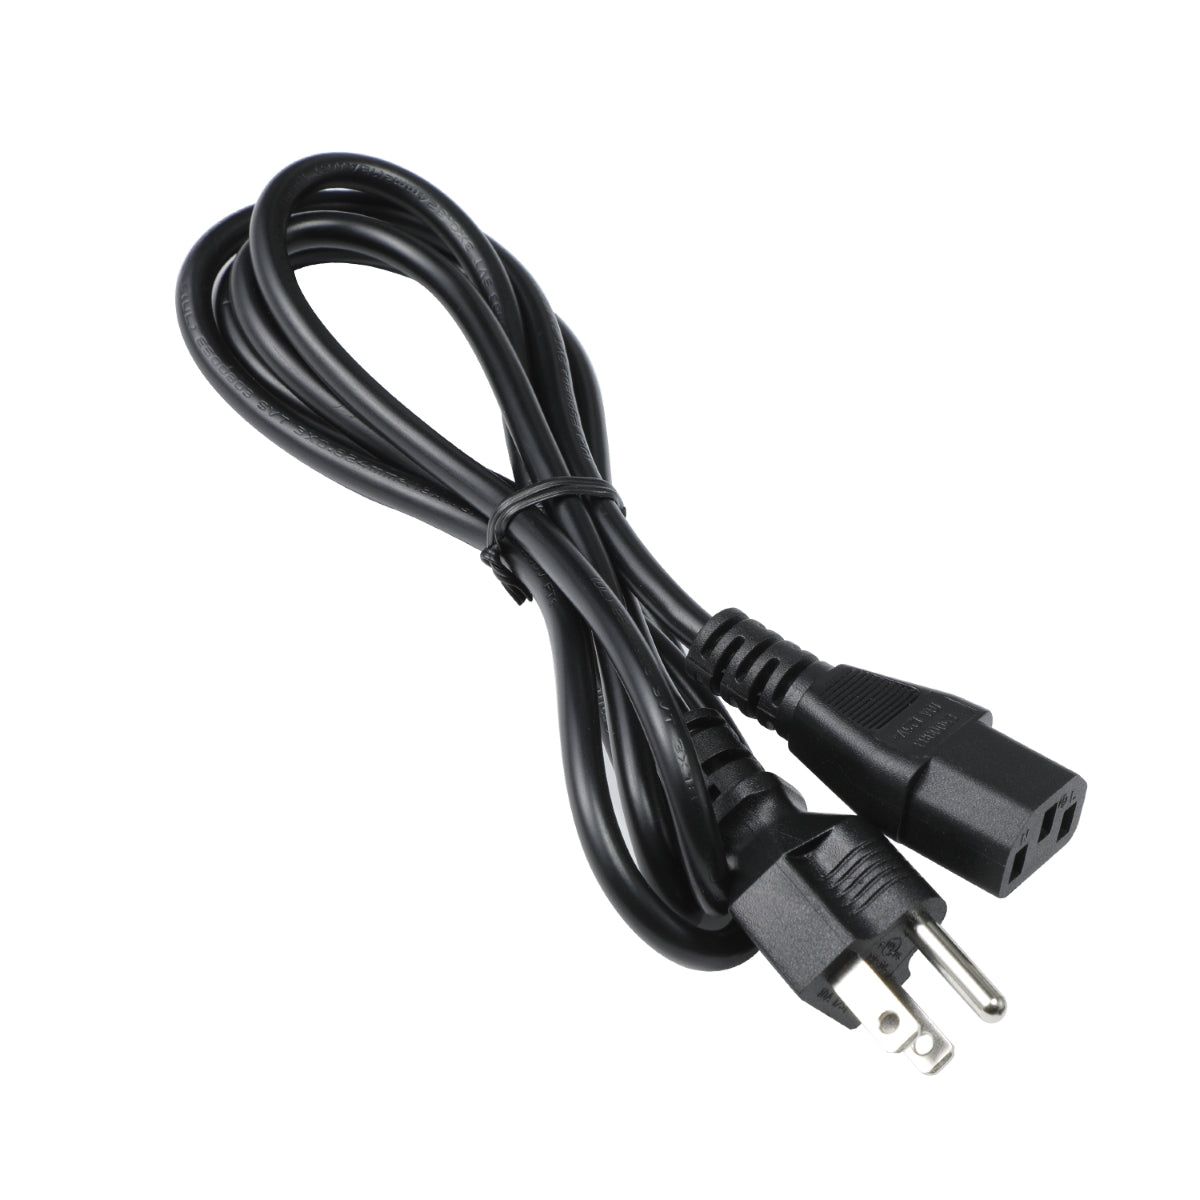 Power Cable for Philips 252B9 Monitor.